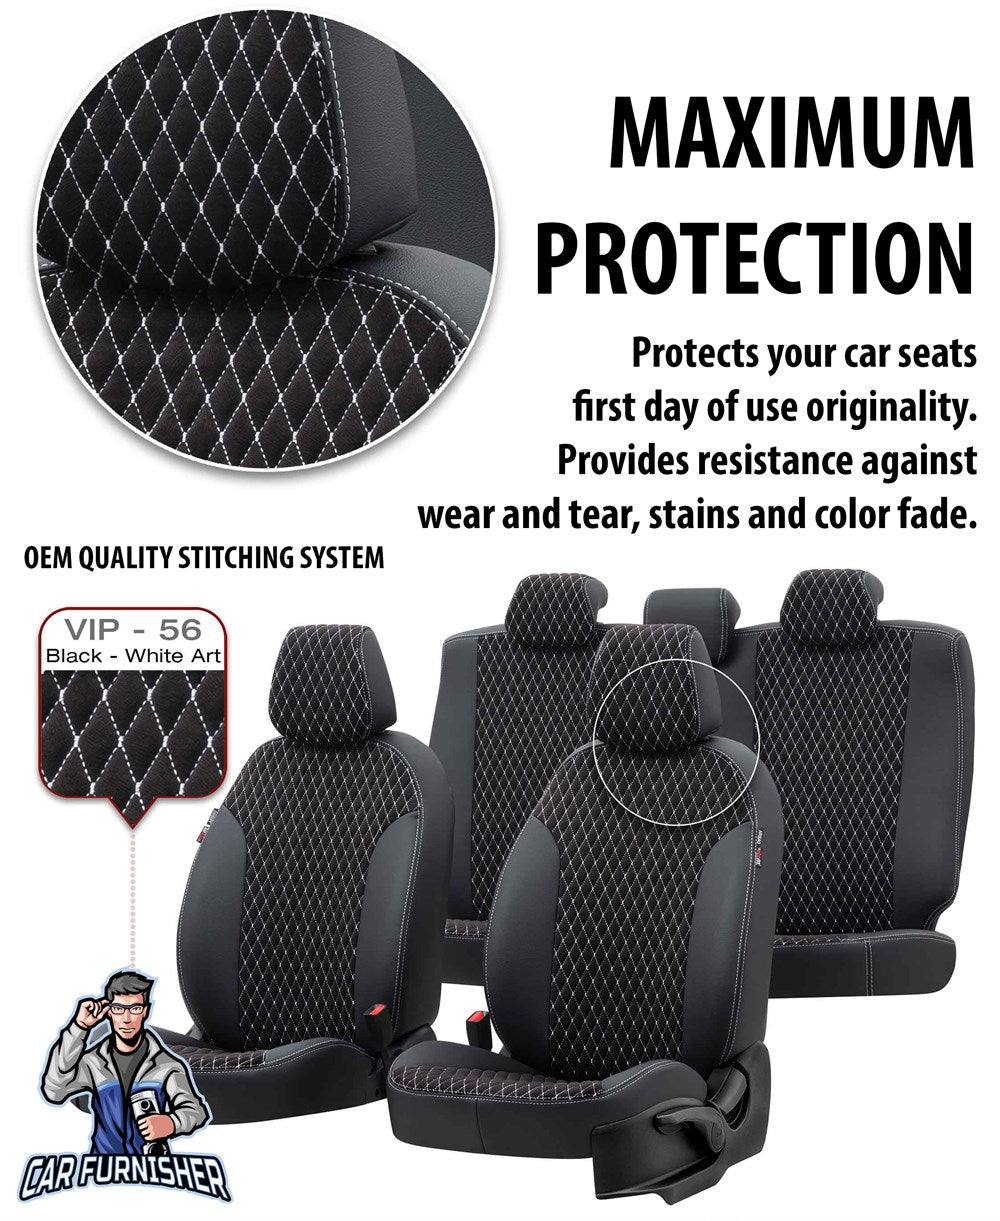 Man TGS Seat Cover Amsterdam Foal Feather Design Black Front Seats (2 Seats + Handrest + Headrests) Leather & Foal Feather